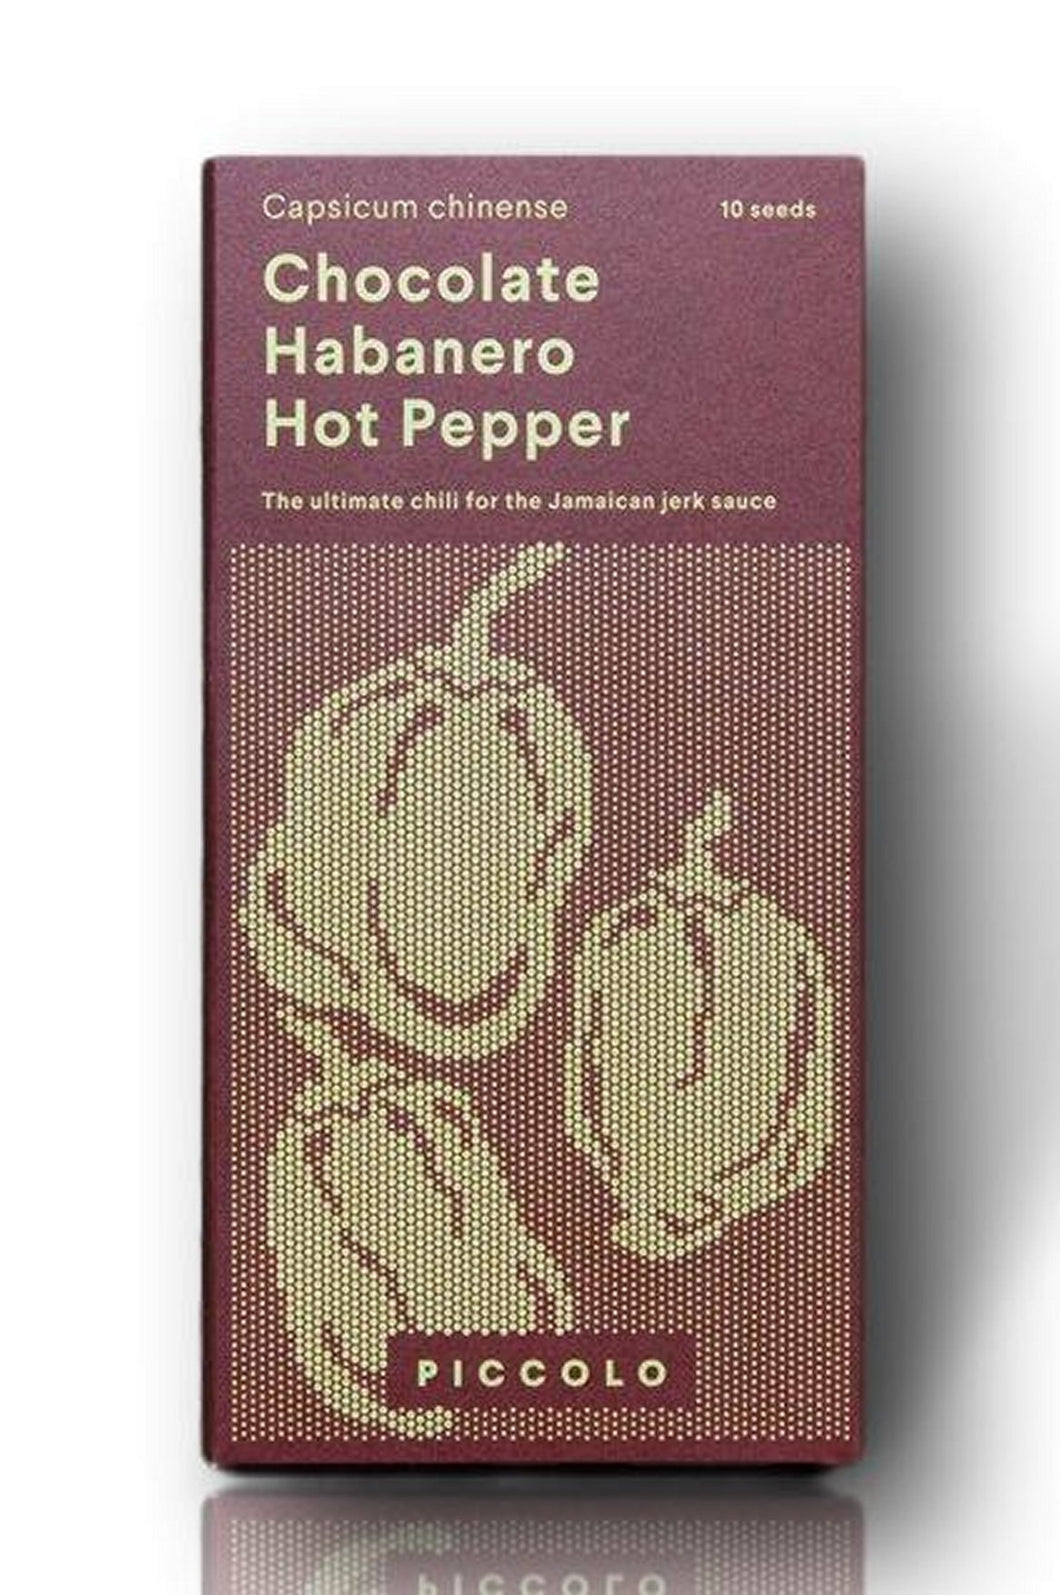 Chocolate Habanero Hot Pepper seeds with step by step guide to growing